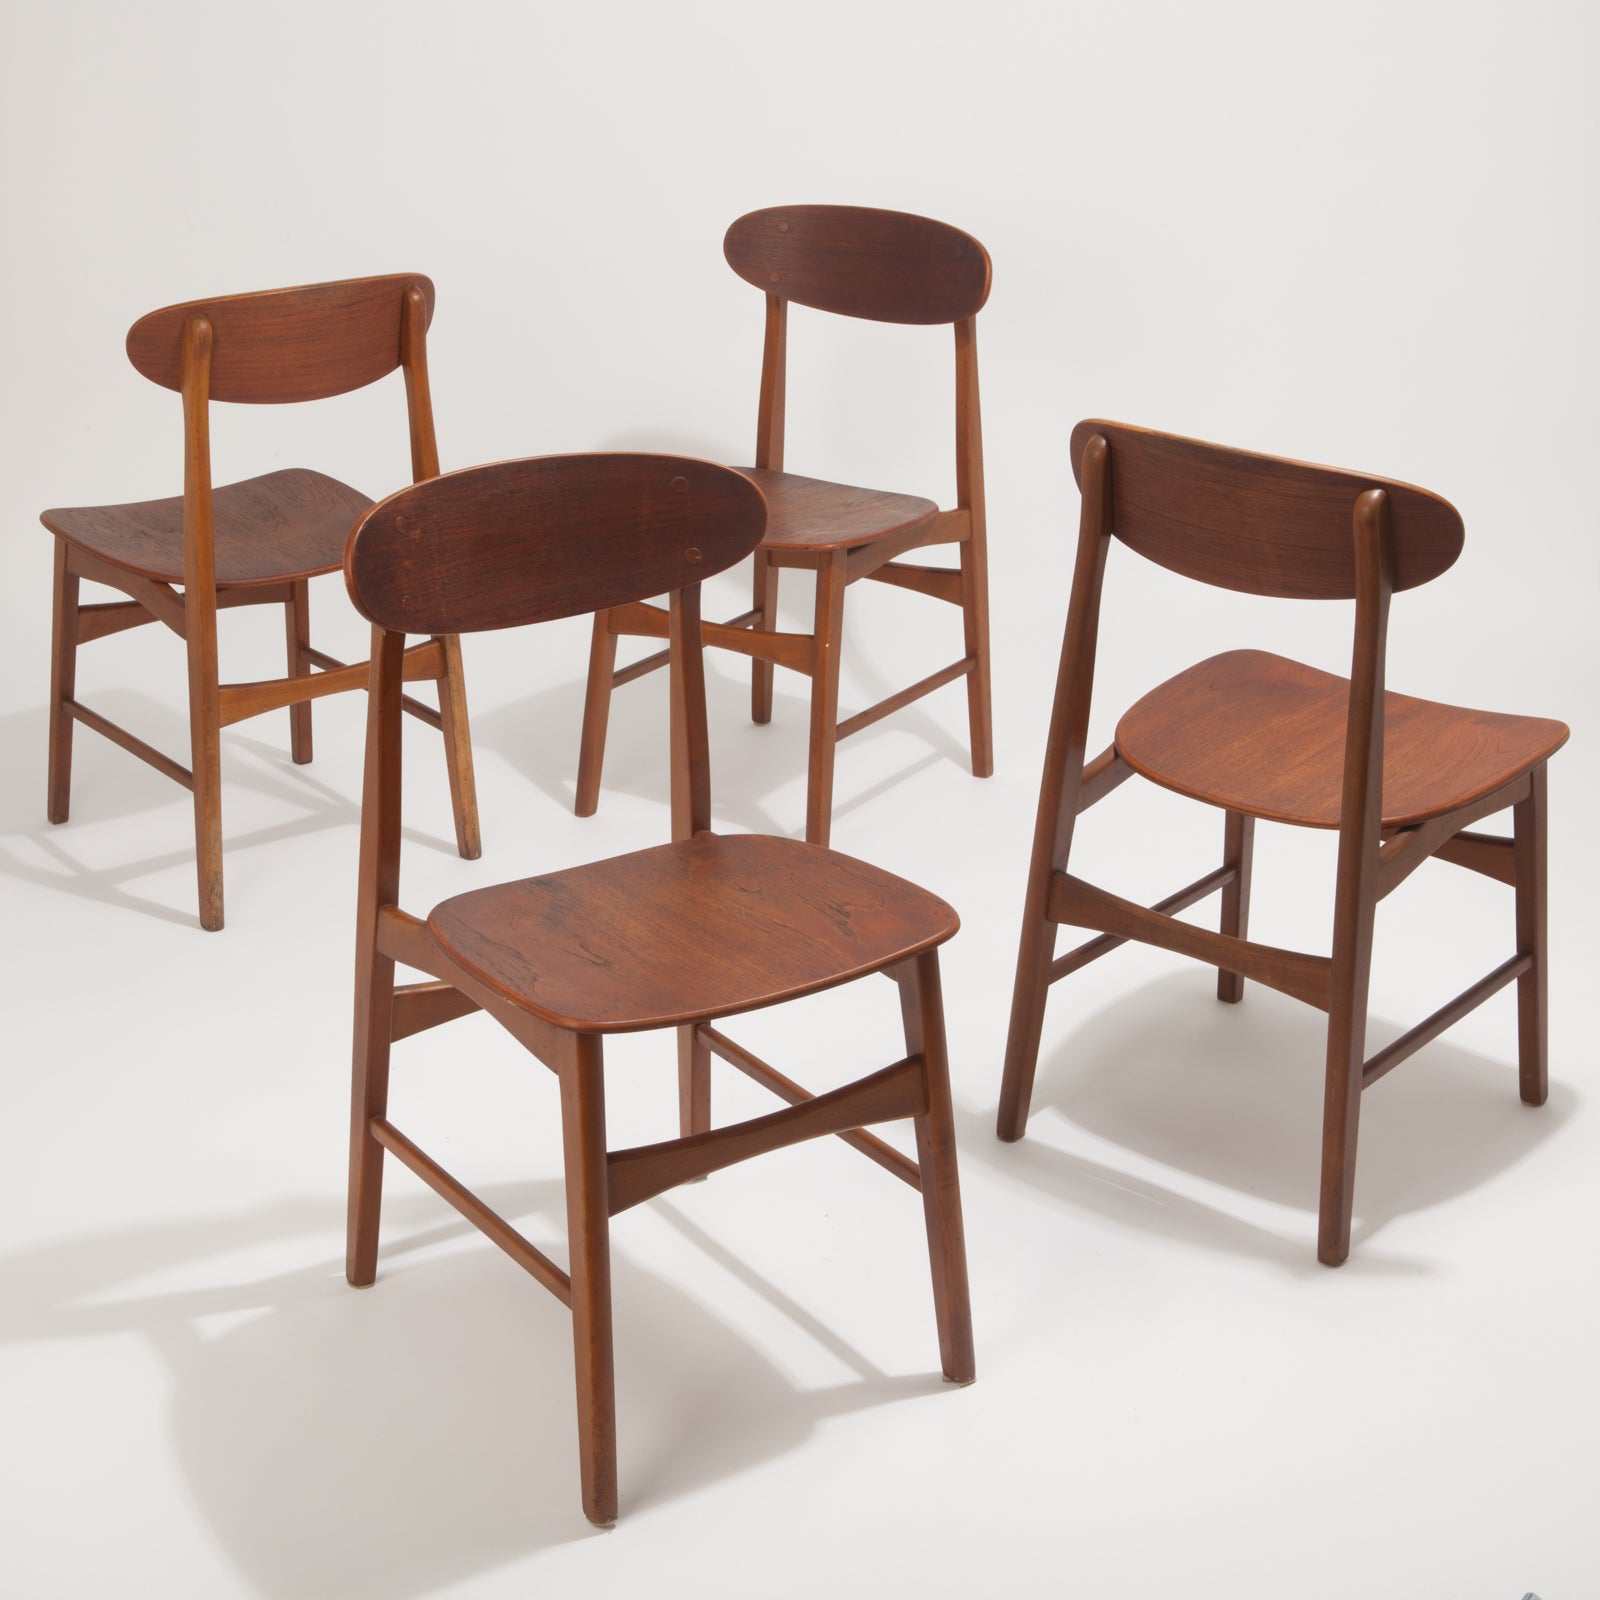 Set of 4 Teak and Beech Dining Chairs